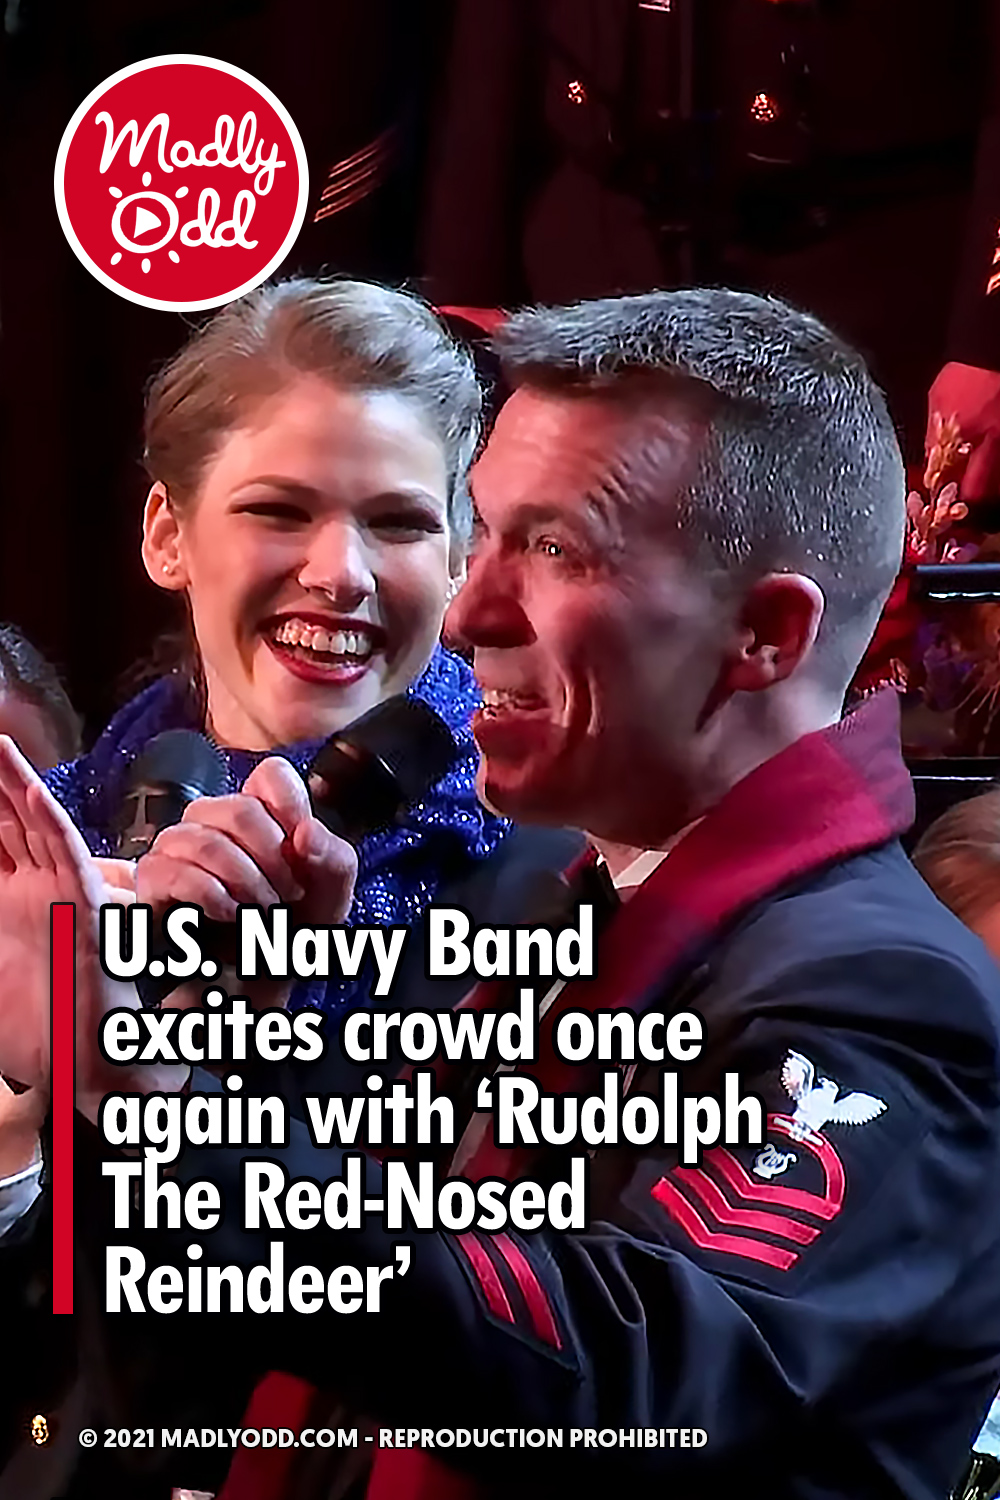 U.S. Navy Band excites crowd once again with ‘Rudolph The Red-Nosed Reindeer’